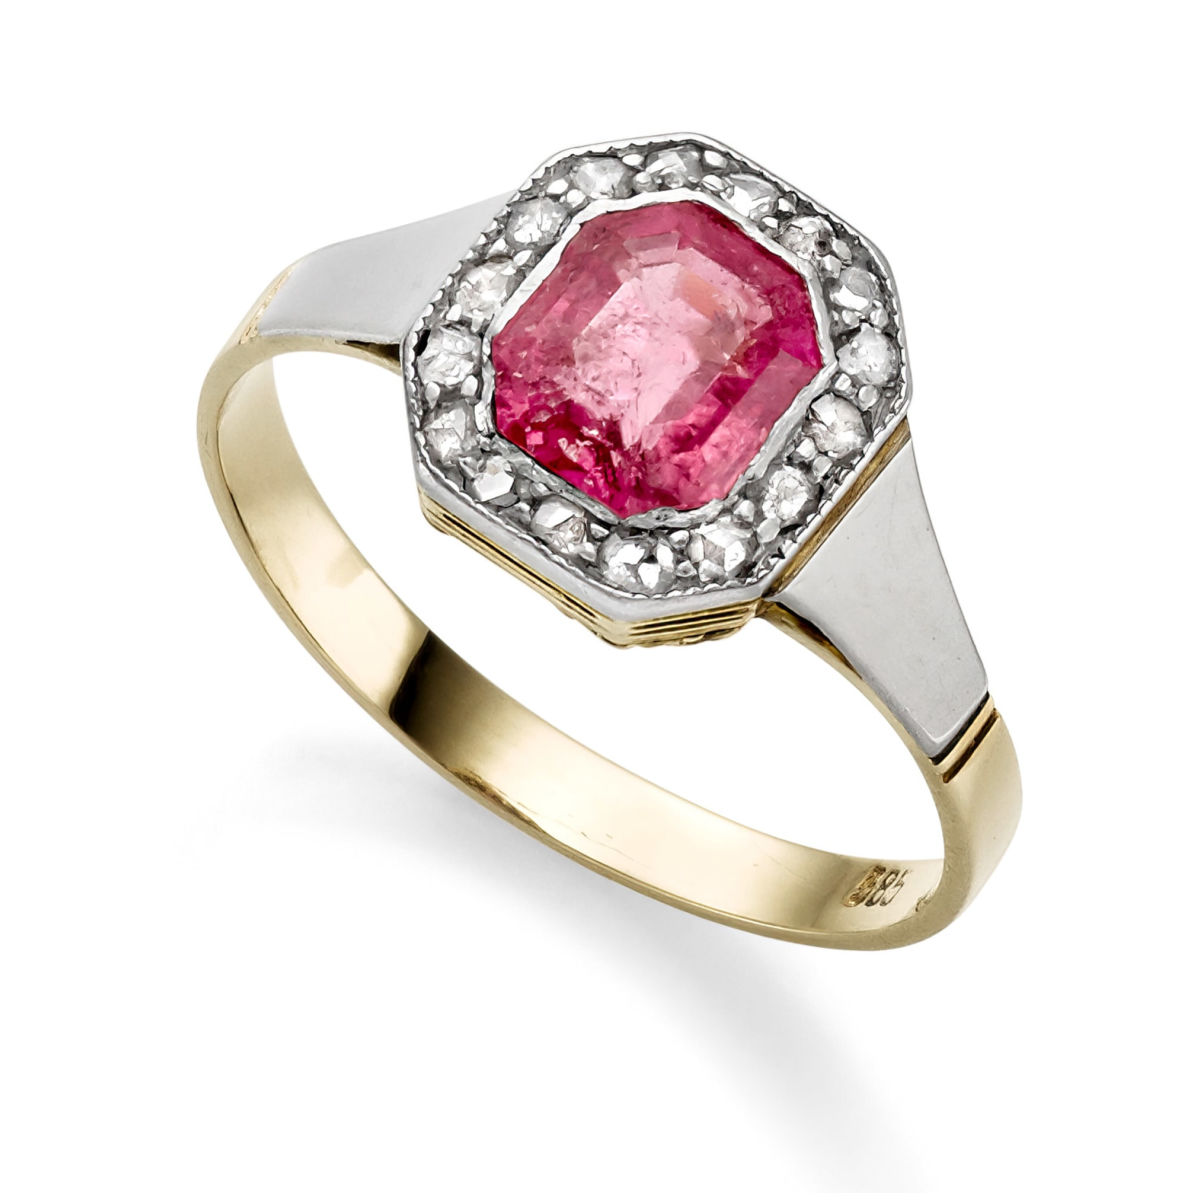 Art Deco entourage ring with pink tourmaline and diamond roses 